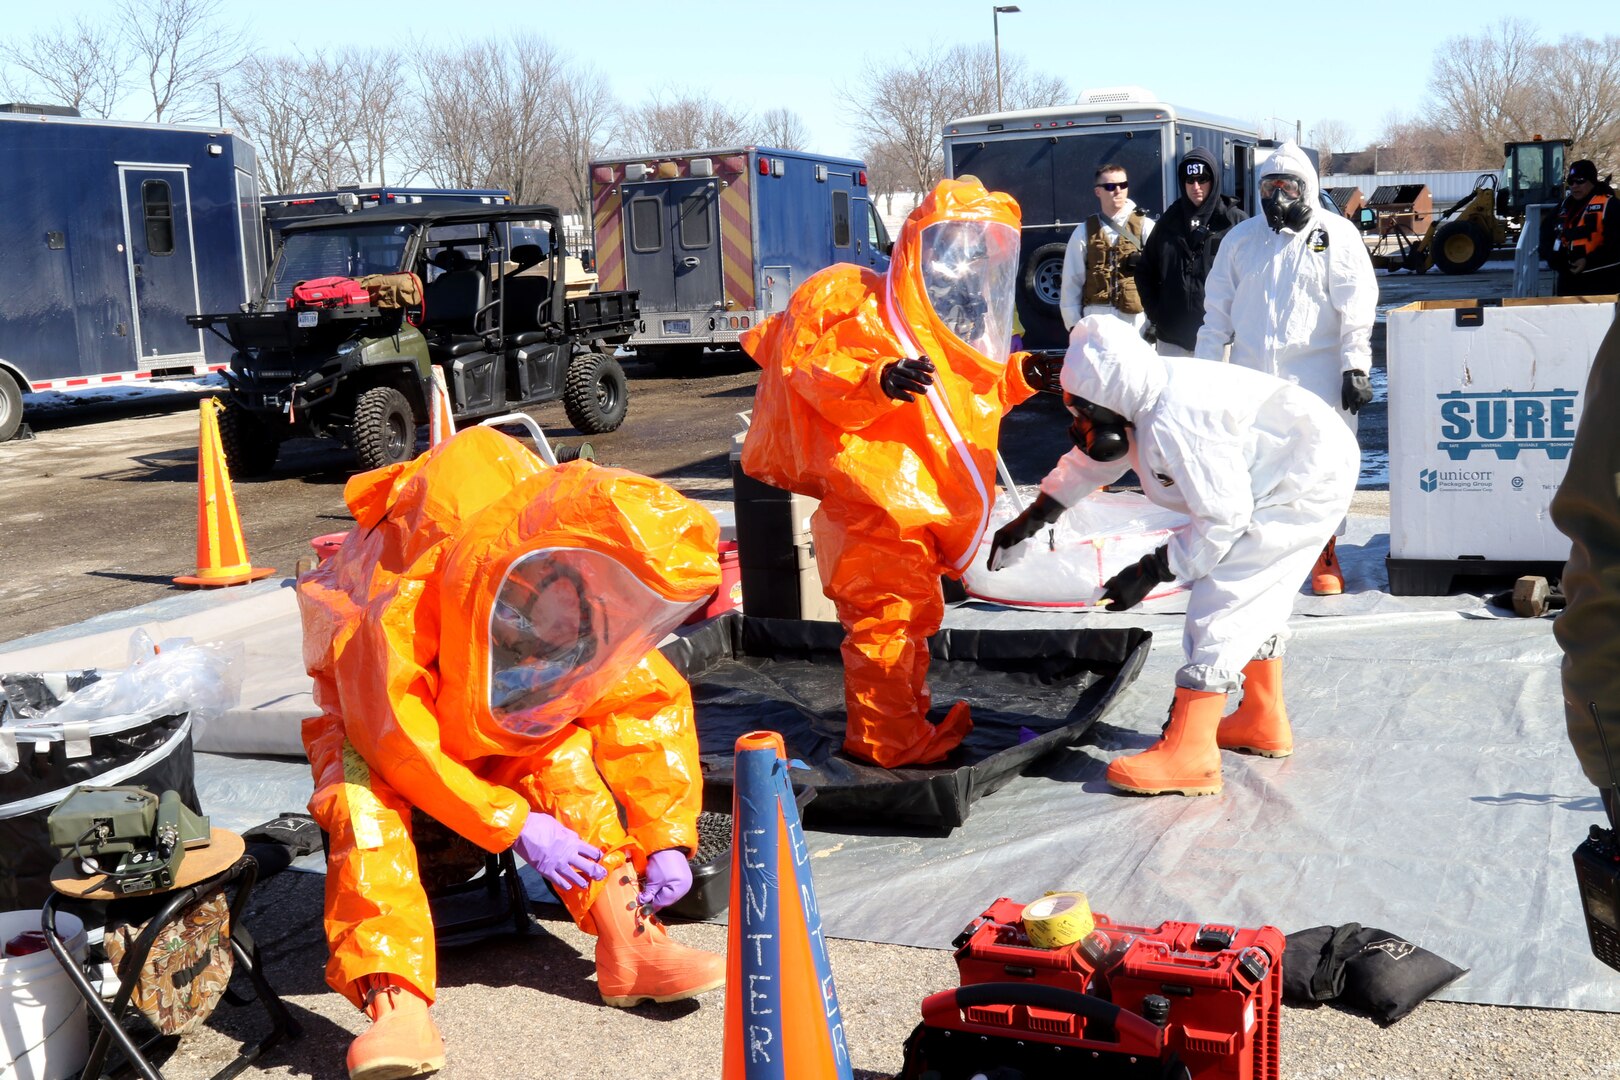 Members of the Wisconsin National Guard’s 54th Civil Support Team conduct decontamination procedures during a collective lanes training exercise in Madison, Wis., March 8, 2022. The Madison-based CST is the state’s full-time response team for emergencies or terrorist events that involve weapons of mass destruction, toxic industrial chemicals or natural disasters.